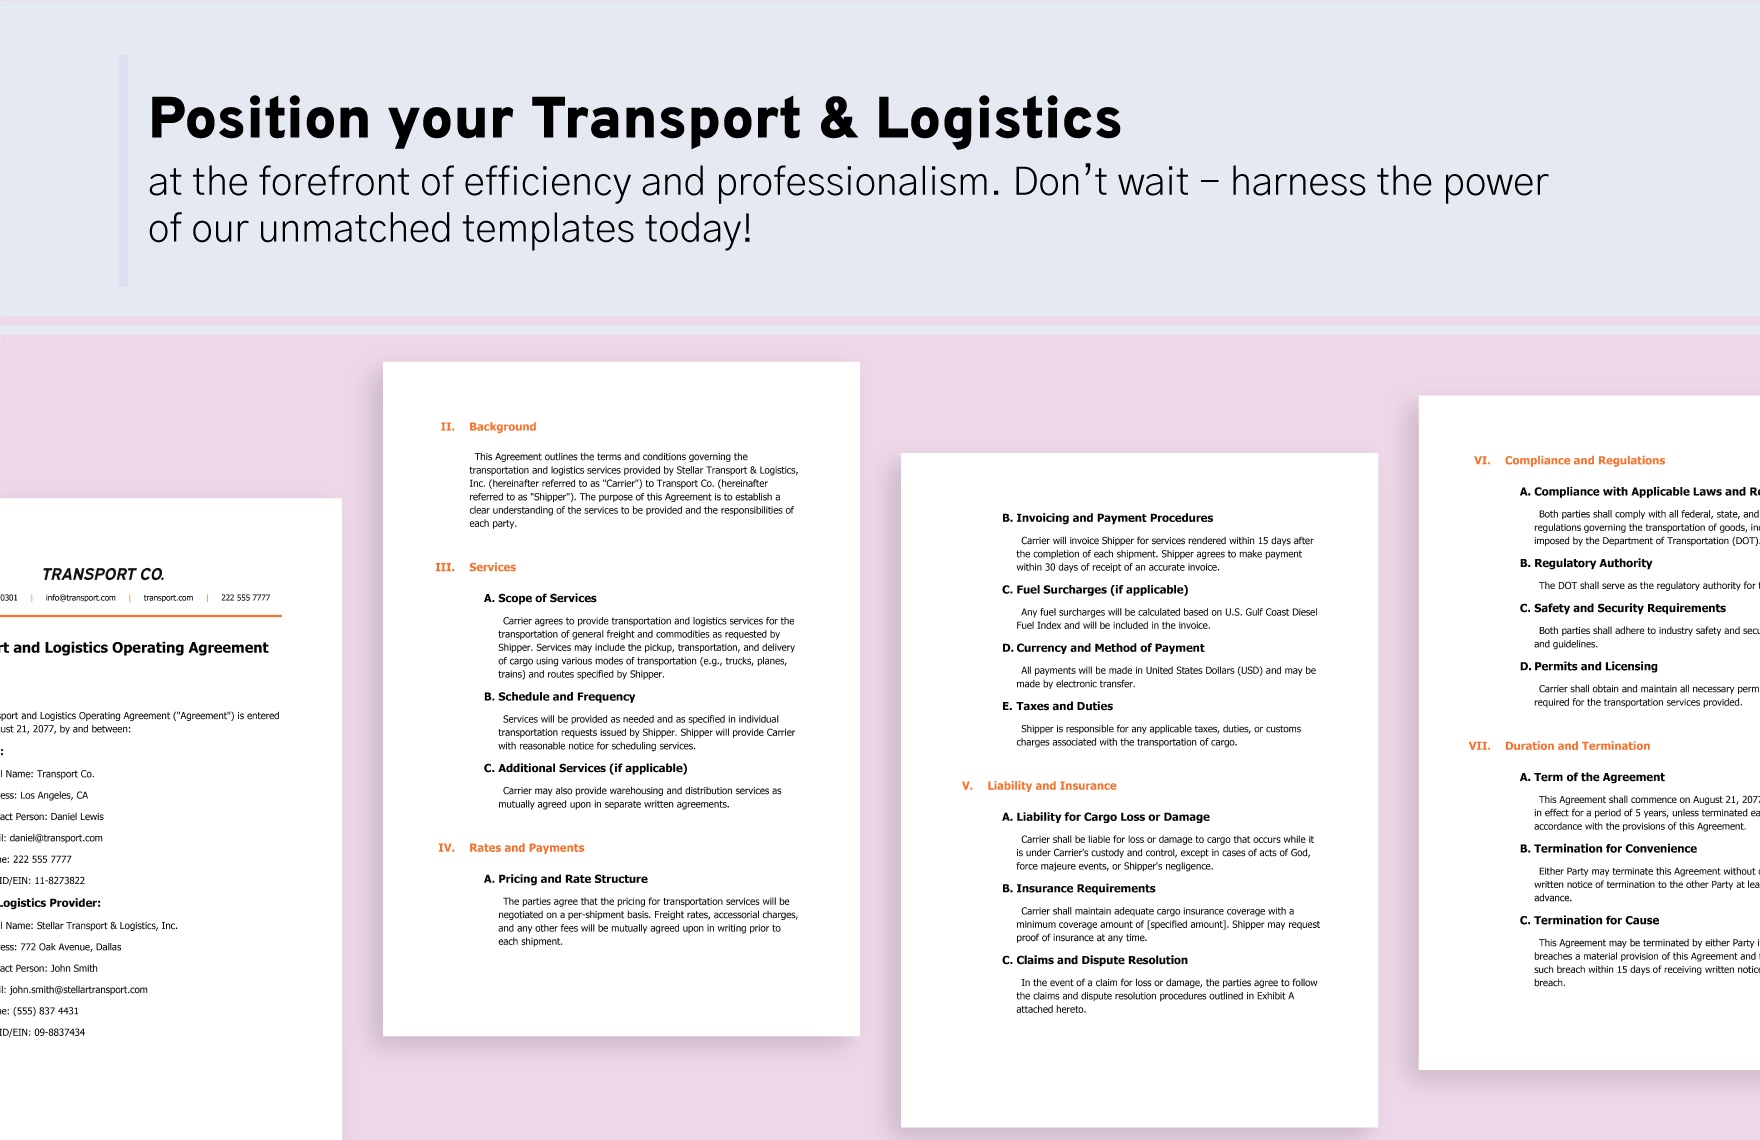 Transport and Logistics Operating Agreement Template